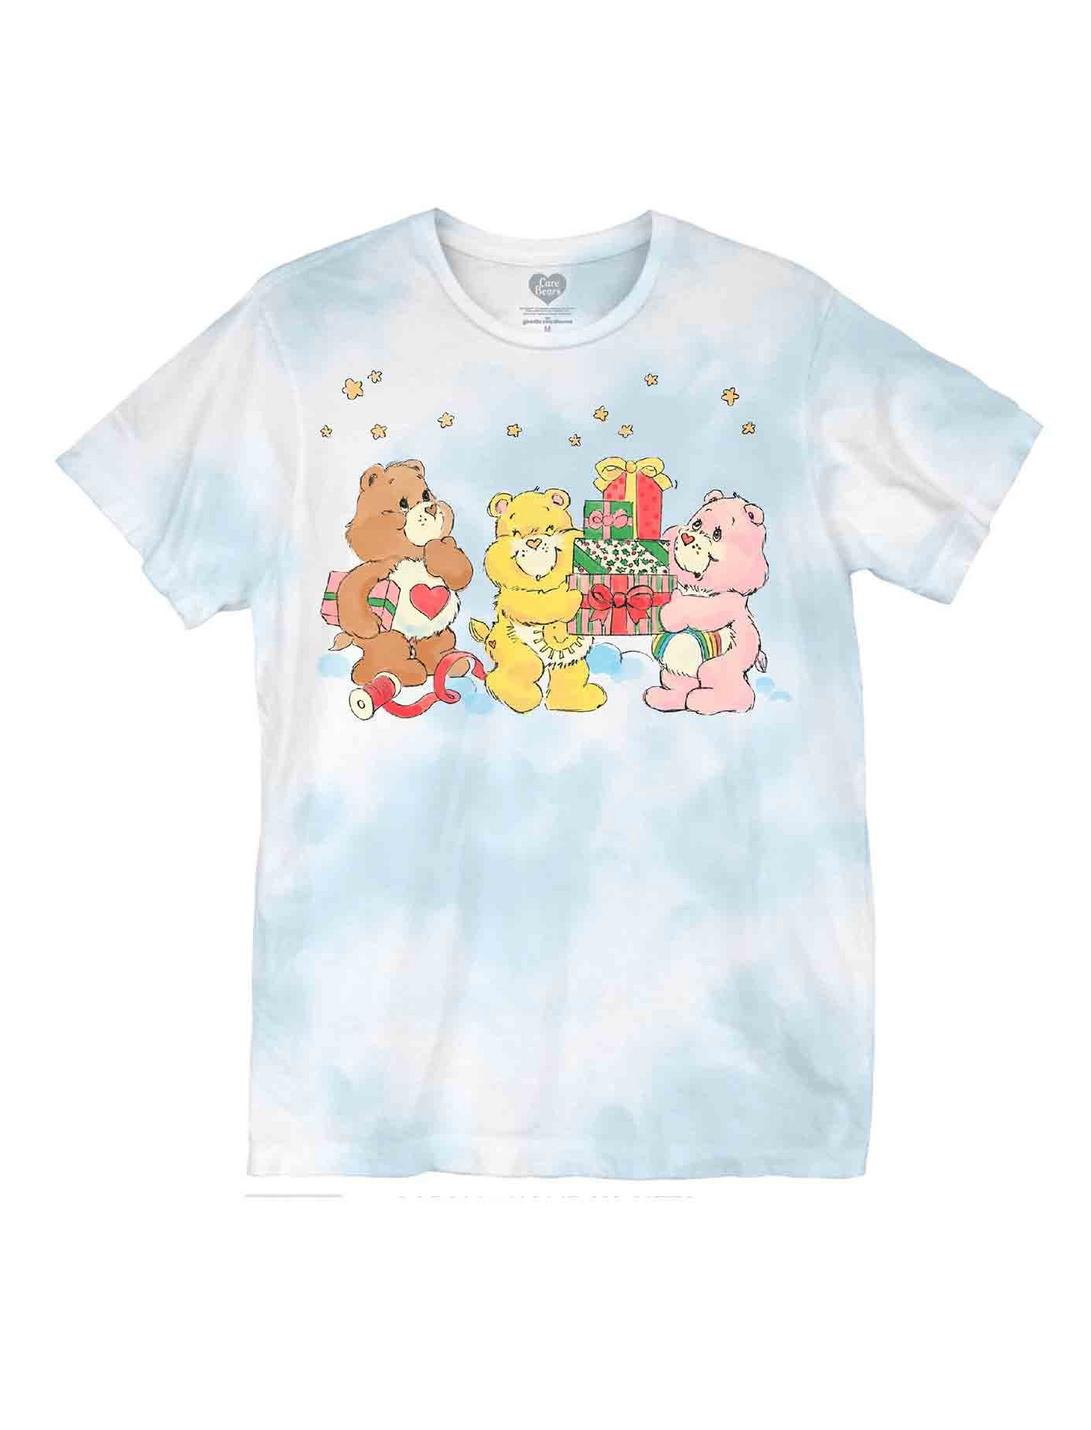 Care Bears Holiday Gifts Tie-Dye Boyfriend Fit Girls T-Shirt, MULTI, hi-res